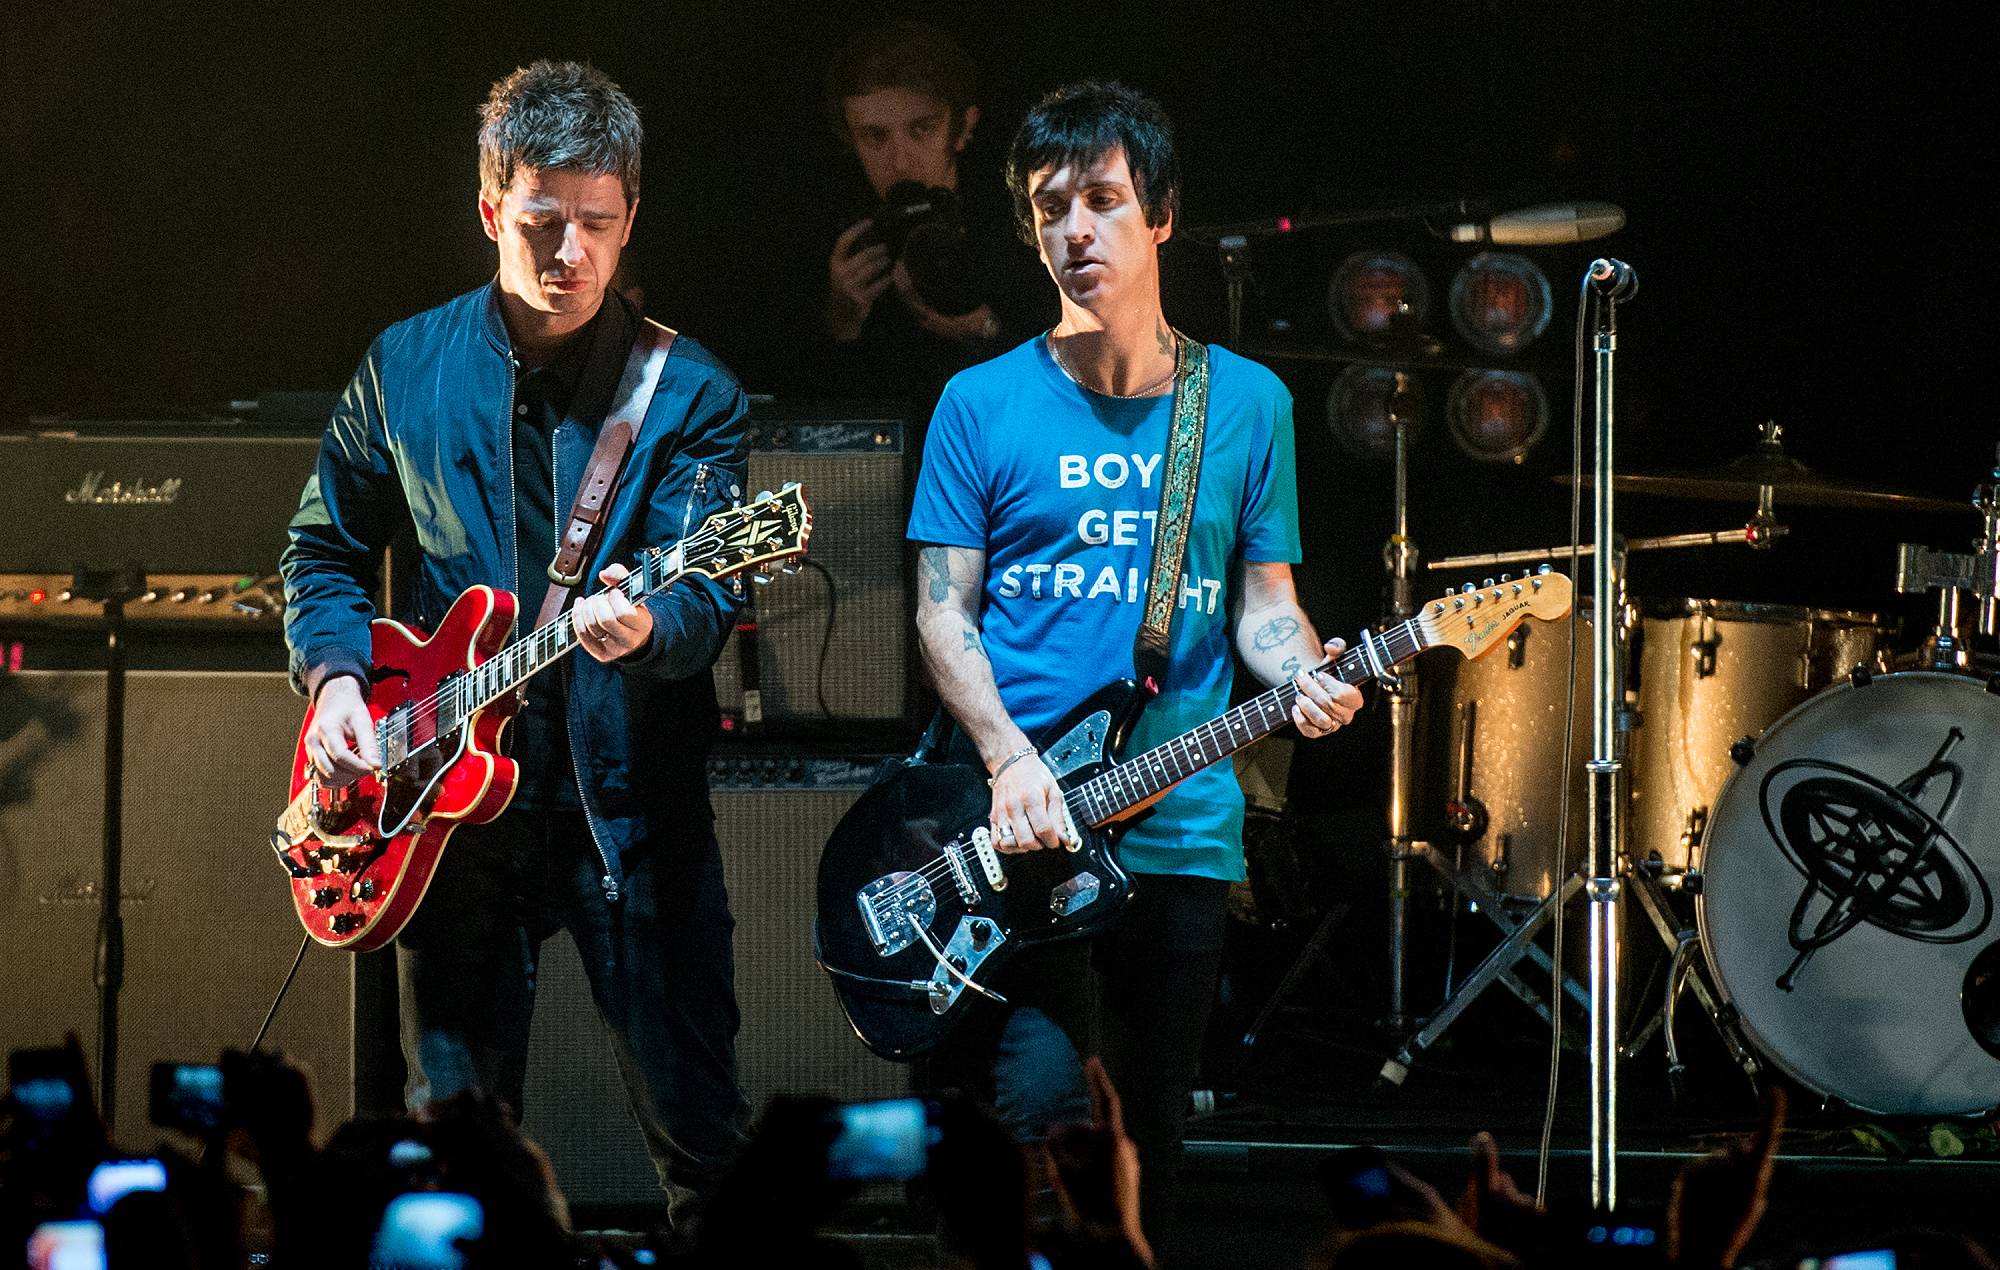 Noel Gallagher joins Johnny Marr at Brixton Academy on October 23, 2014 in London, England. (Photo by Ollie Millington/WireImage)